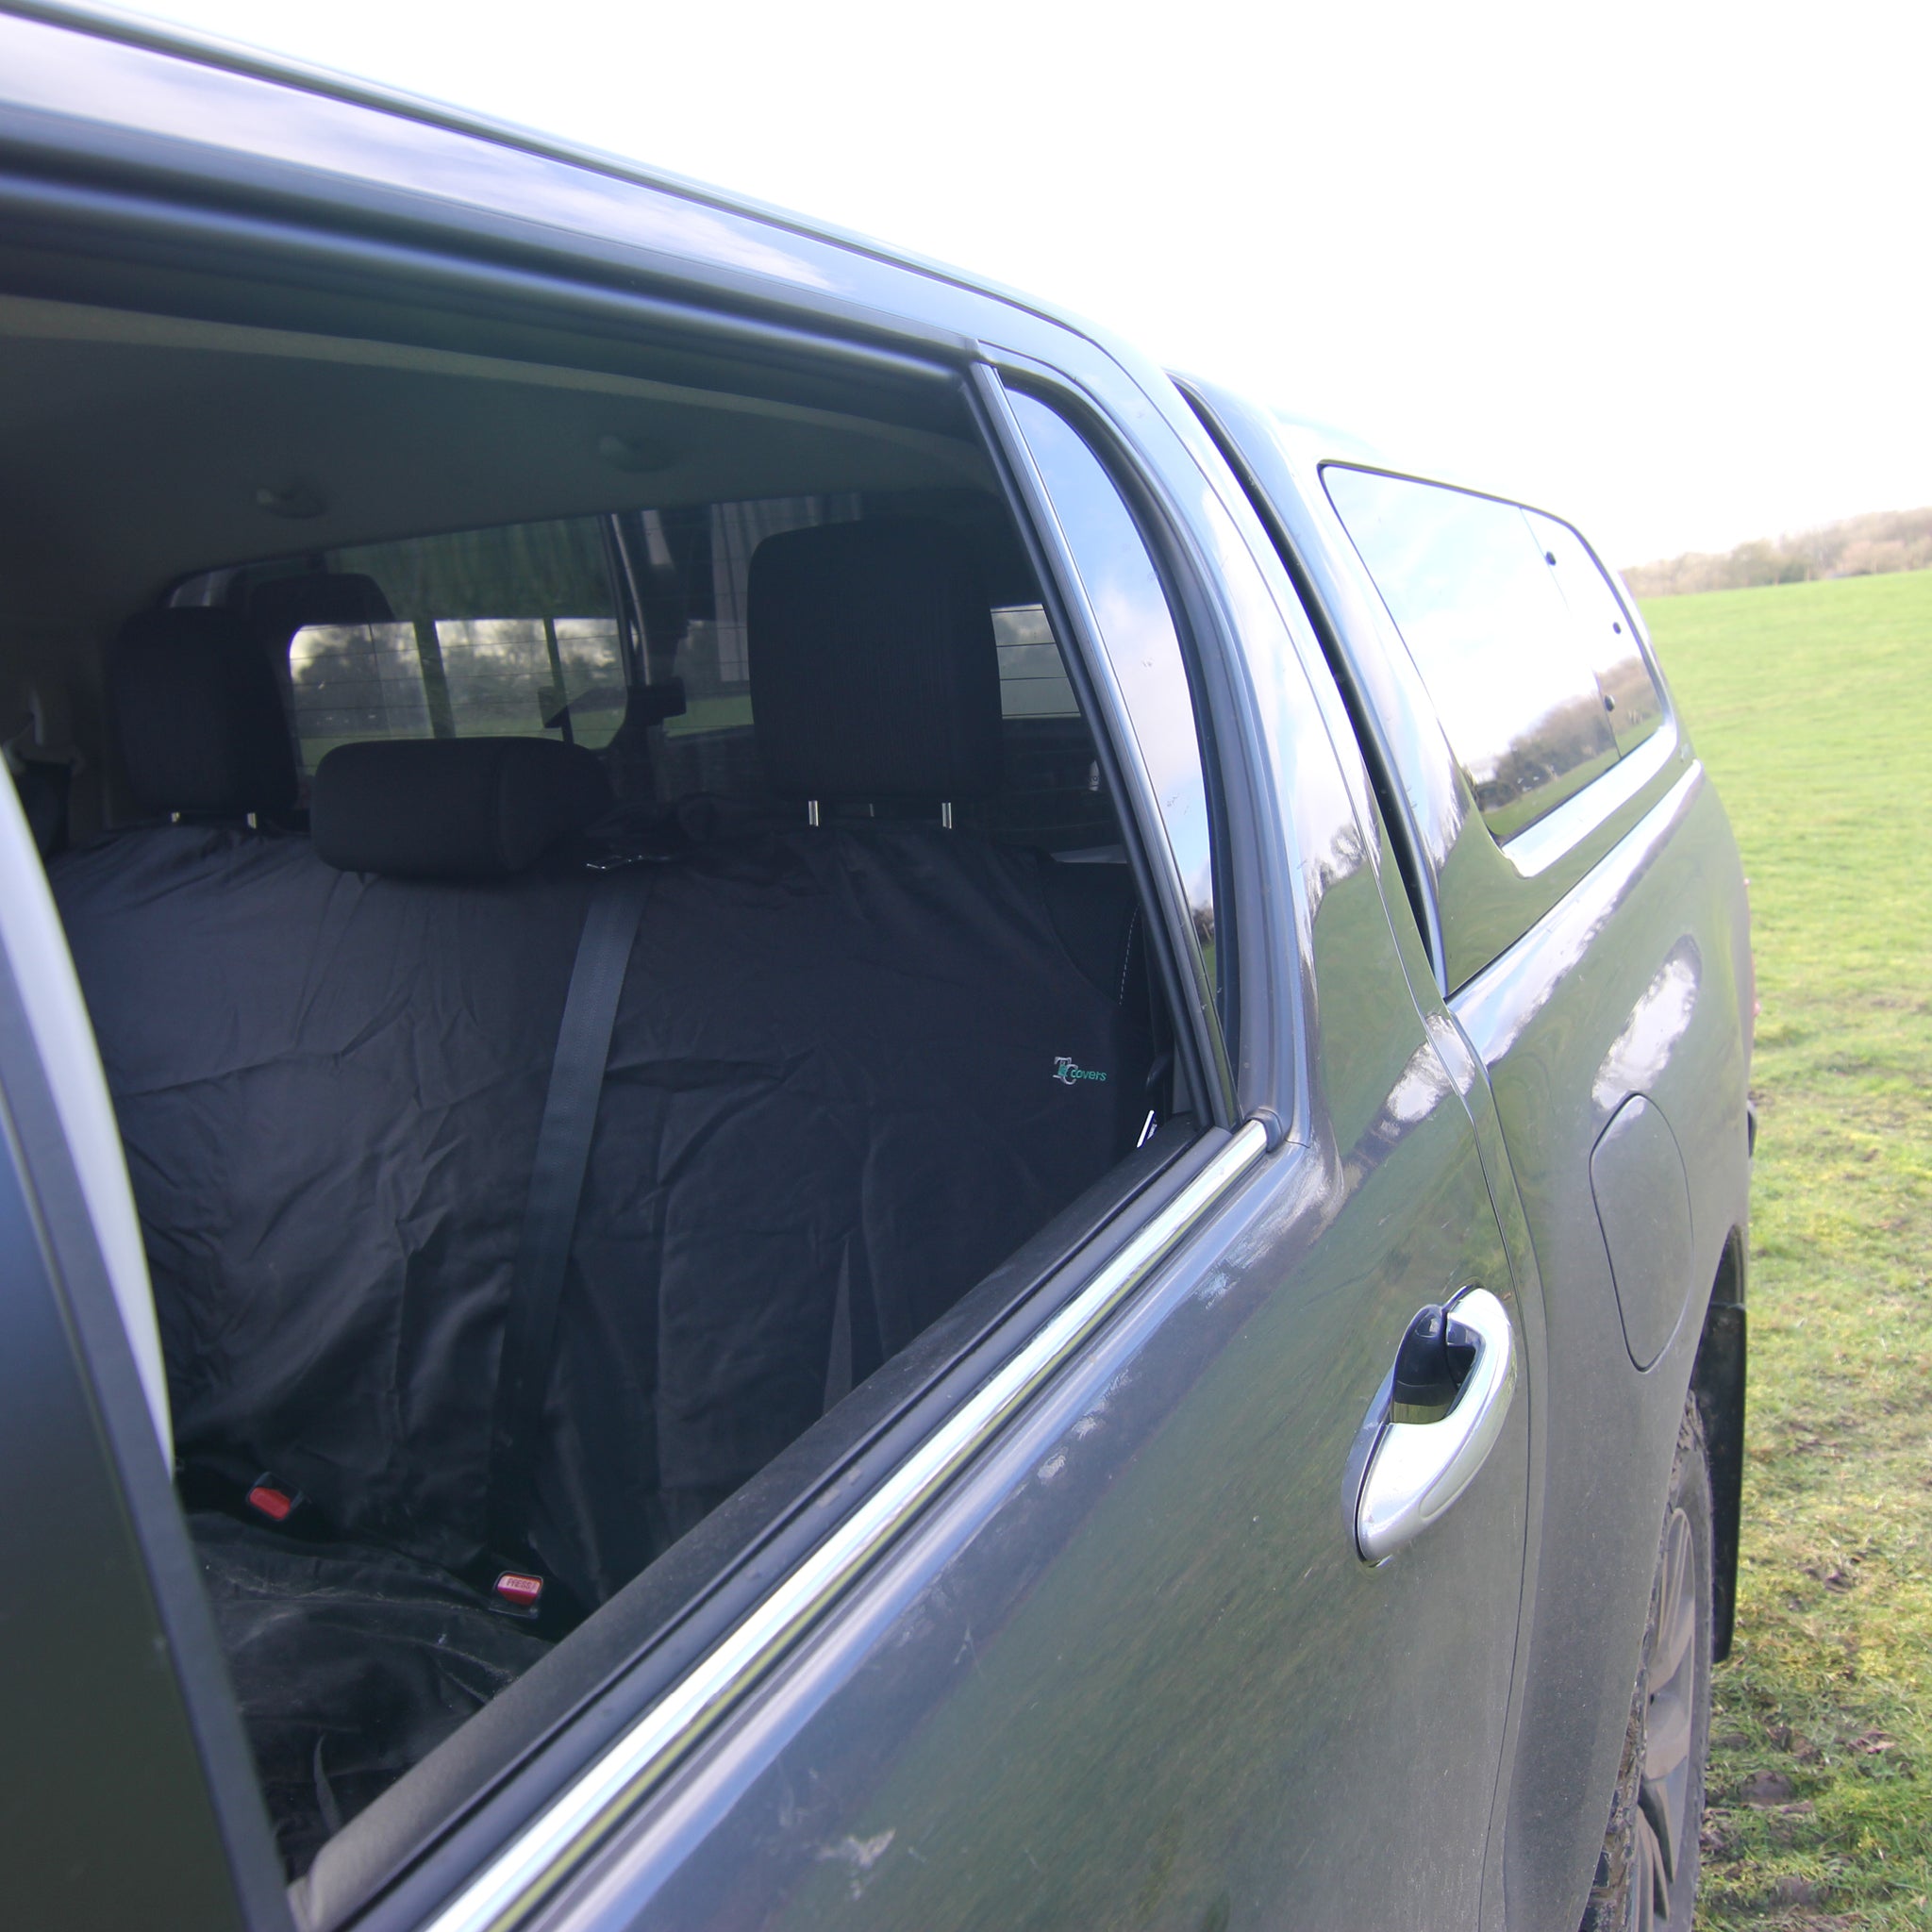 Universal Rear Seat Cover